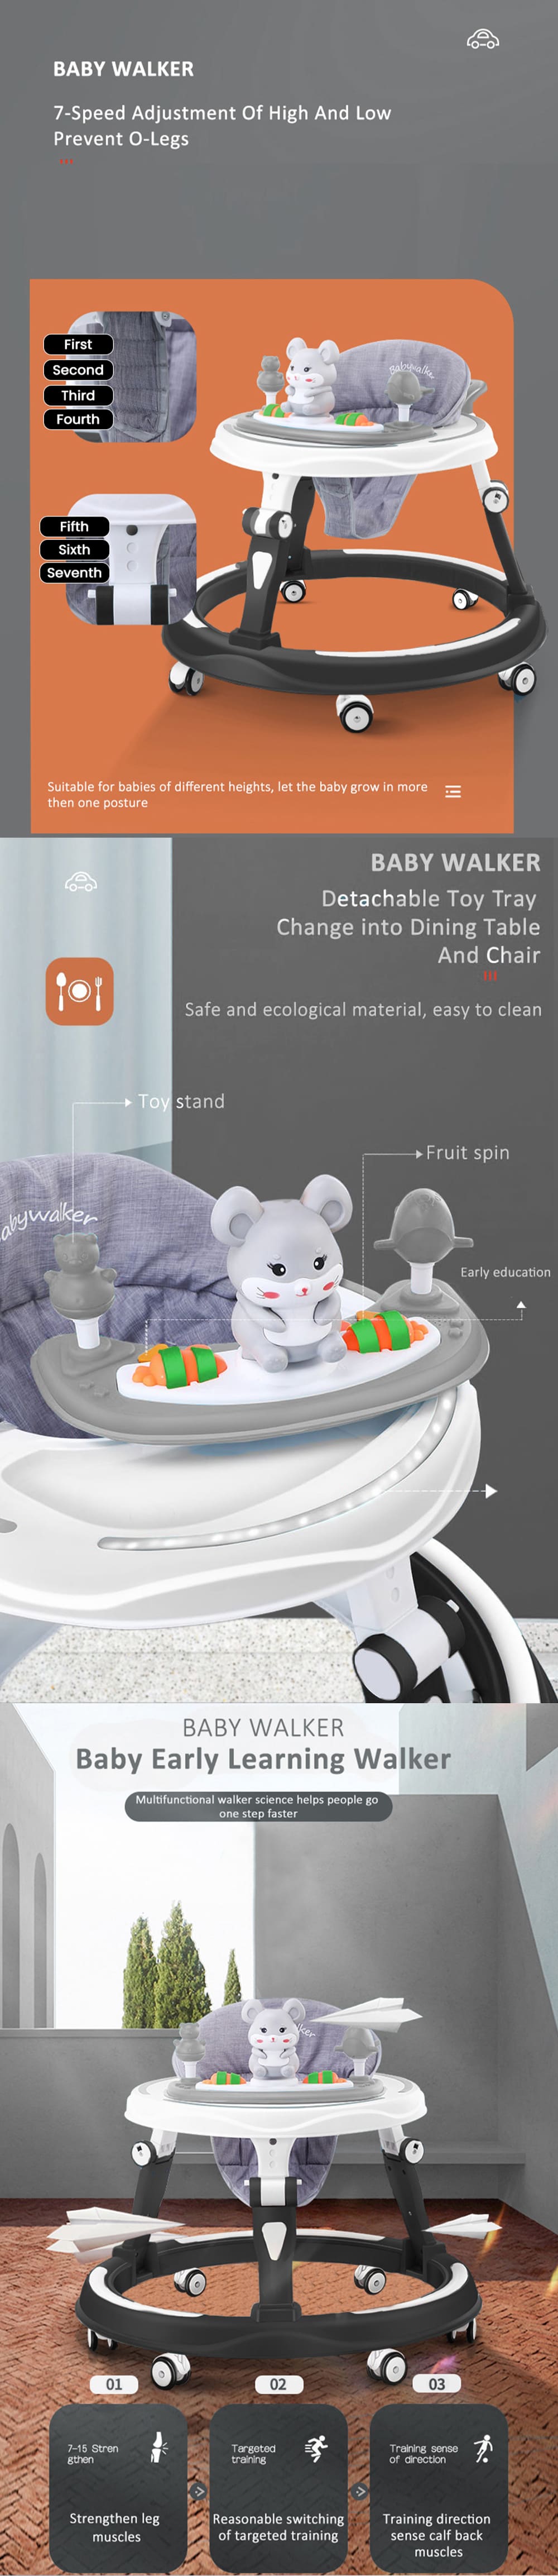 Baby Walker with Detachable Toy Tray